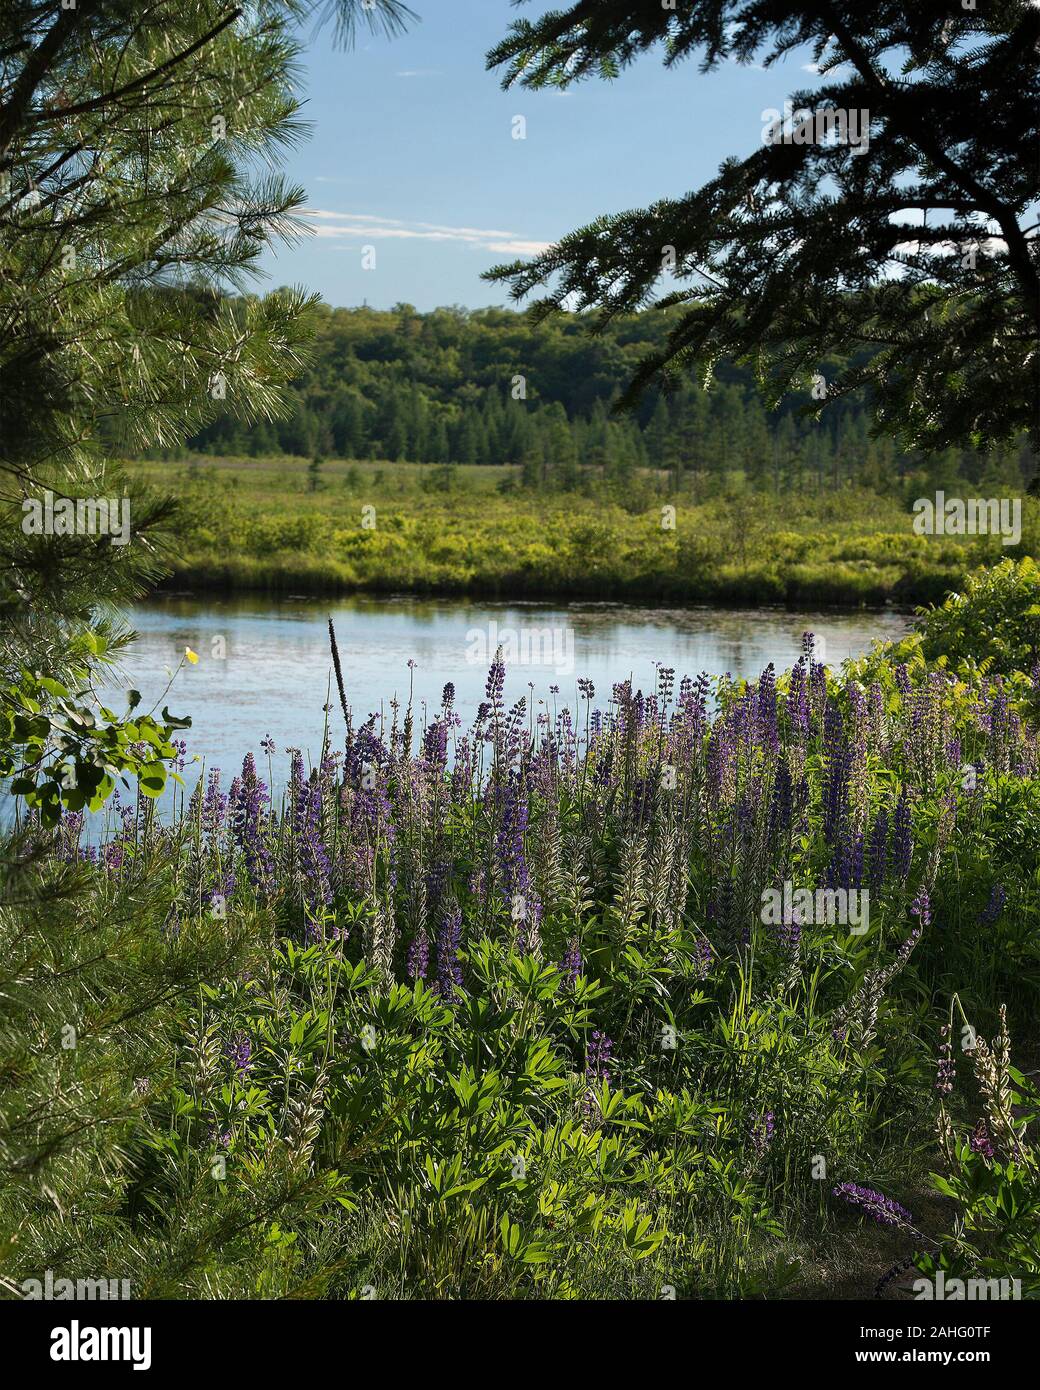 Wild Purple Lupine Flowers in the forest by a pond with trees, foliage and a bleu sky and clouds in the summer scenery displaying its summer season. Stock Photo